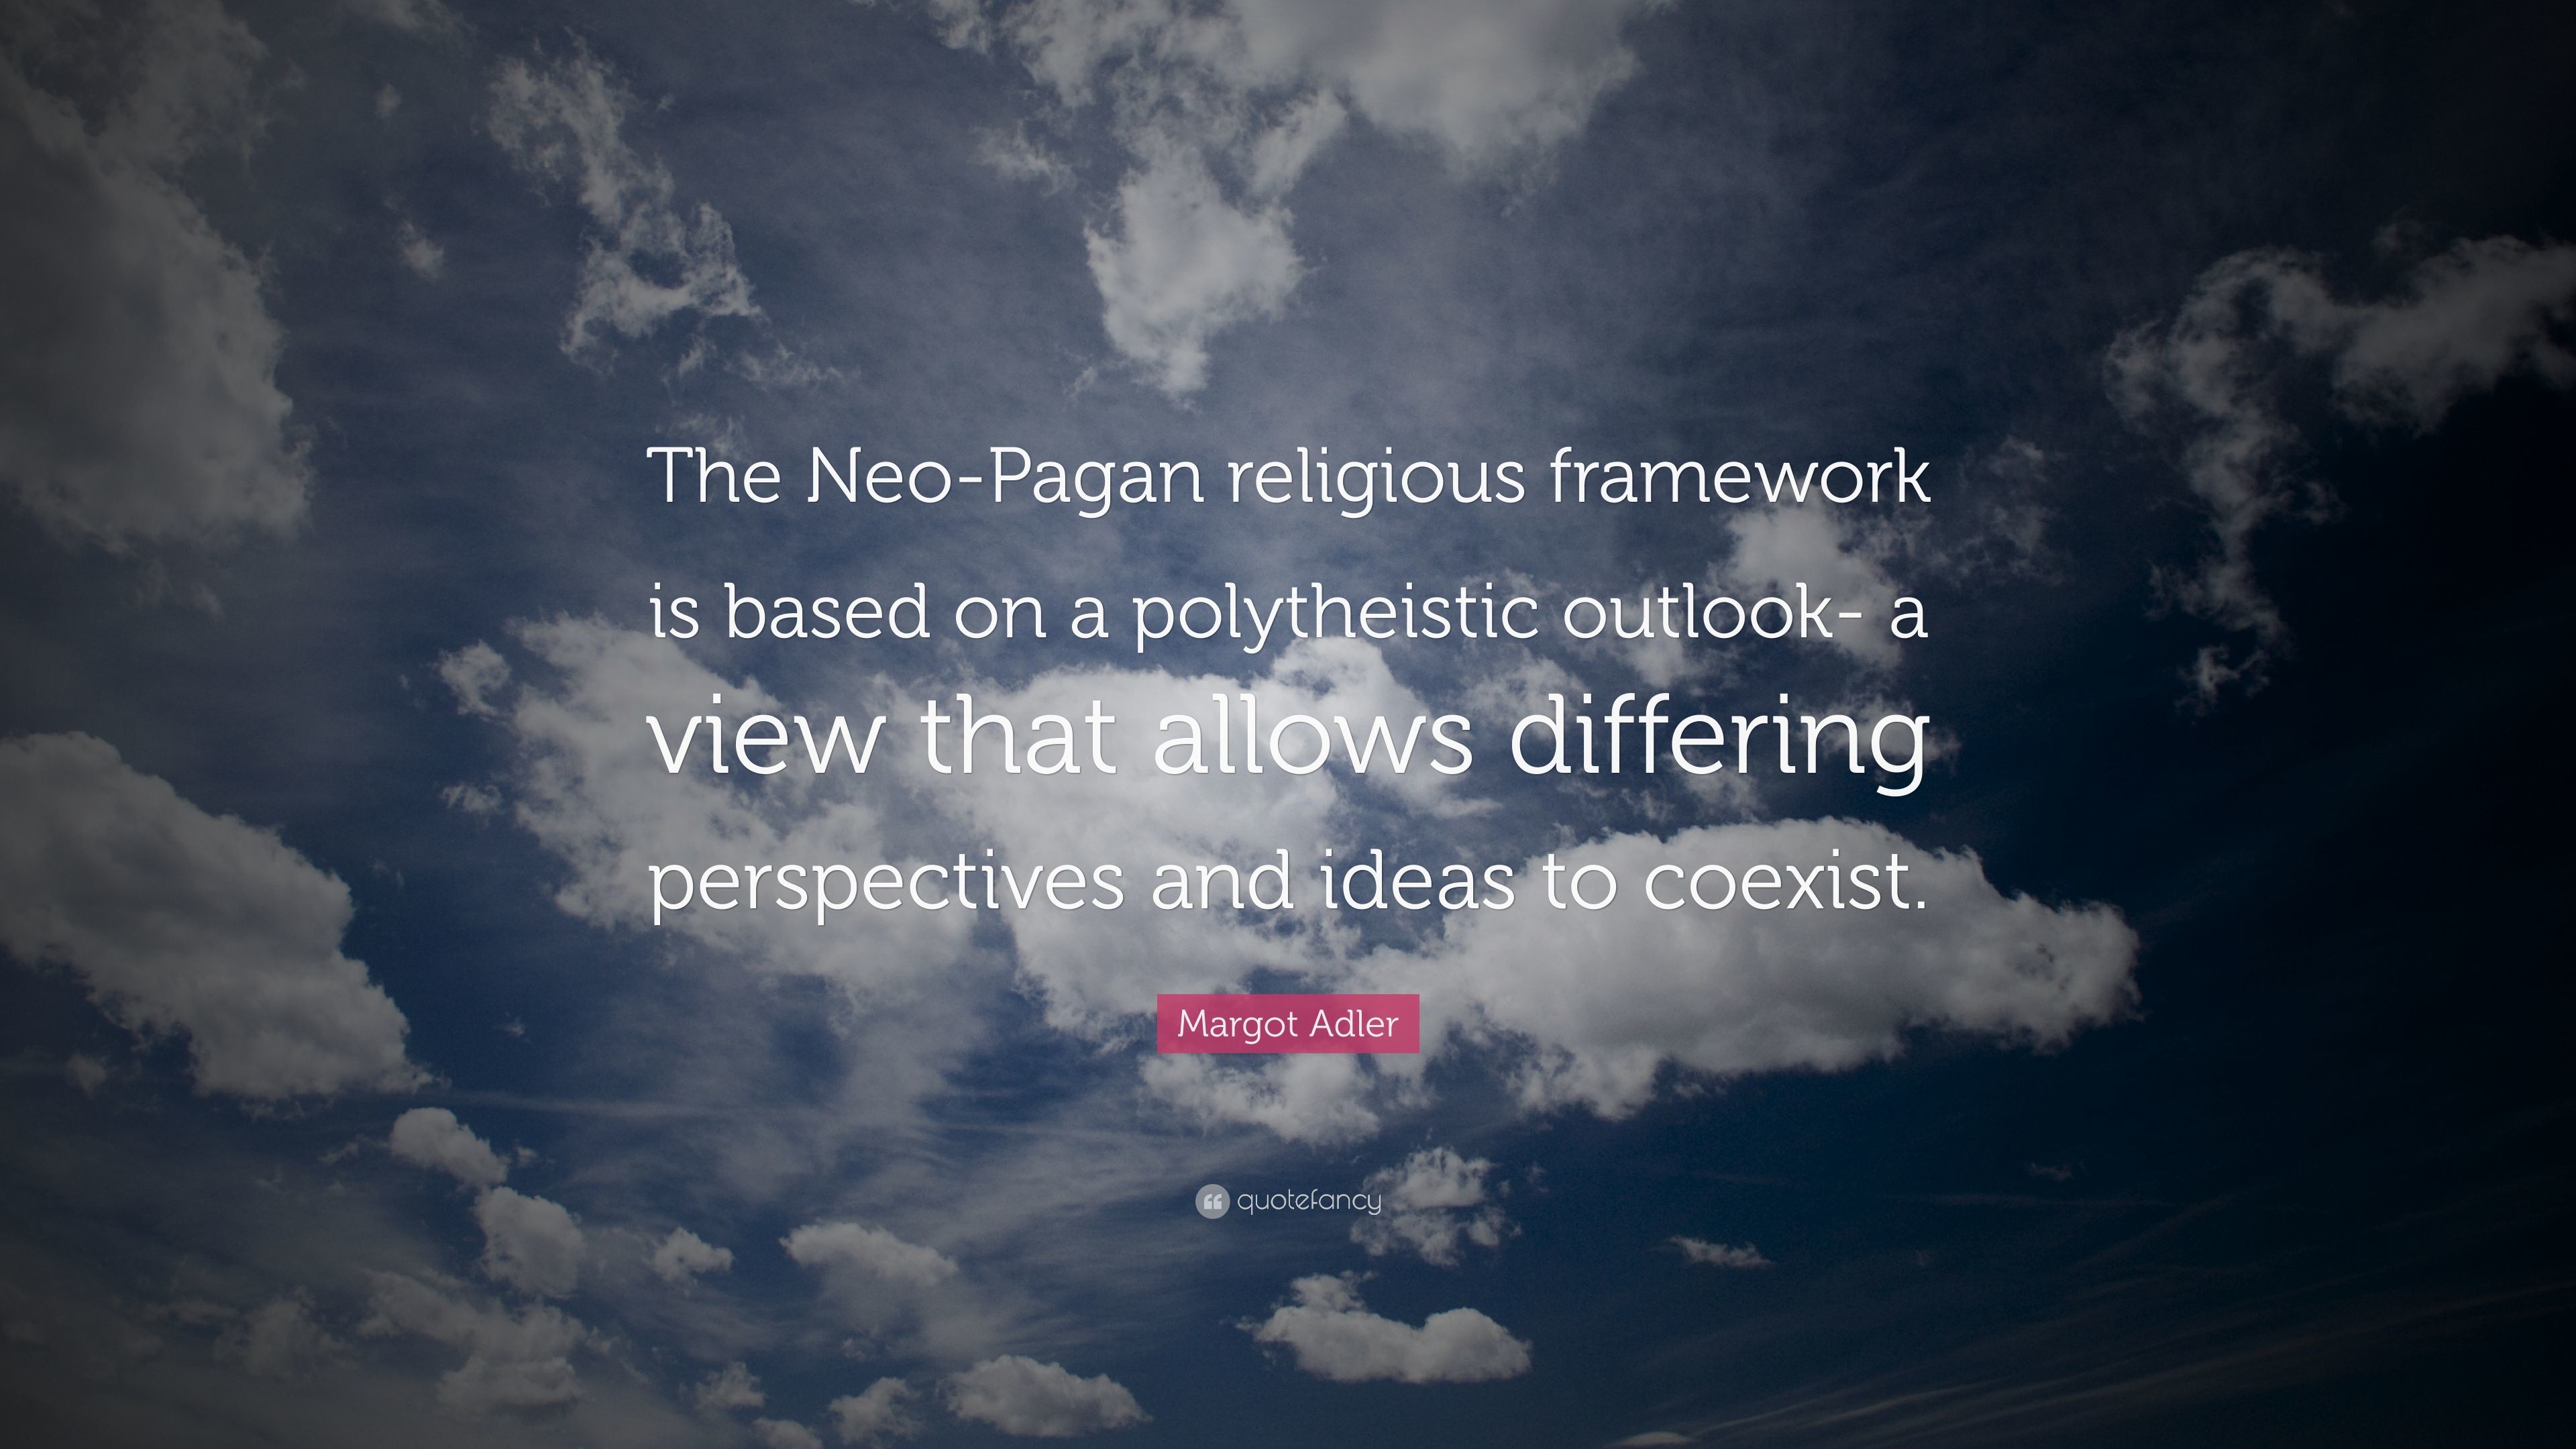 3840x2160 Margot Adler Quote: “The Neo-Pagan religious framework is based on a  polytheistic